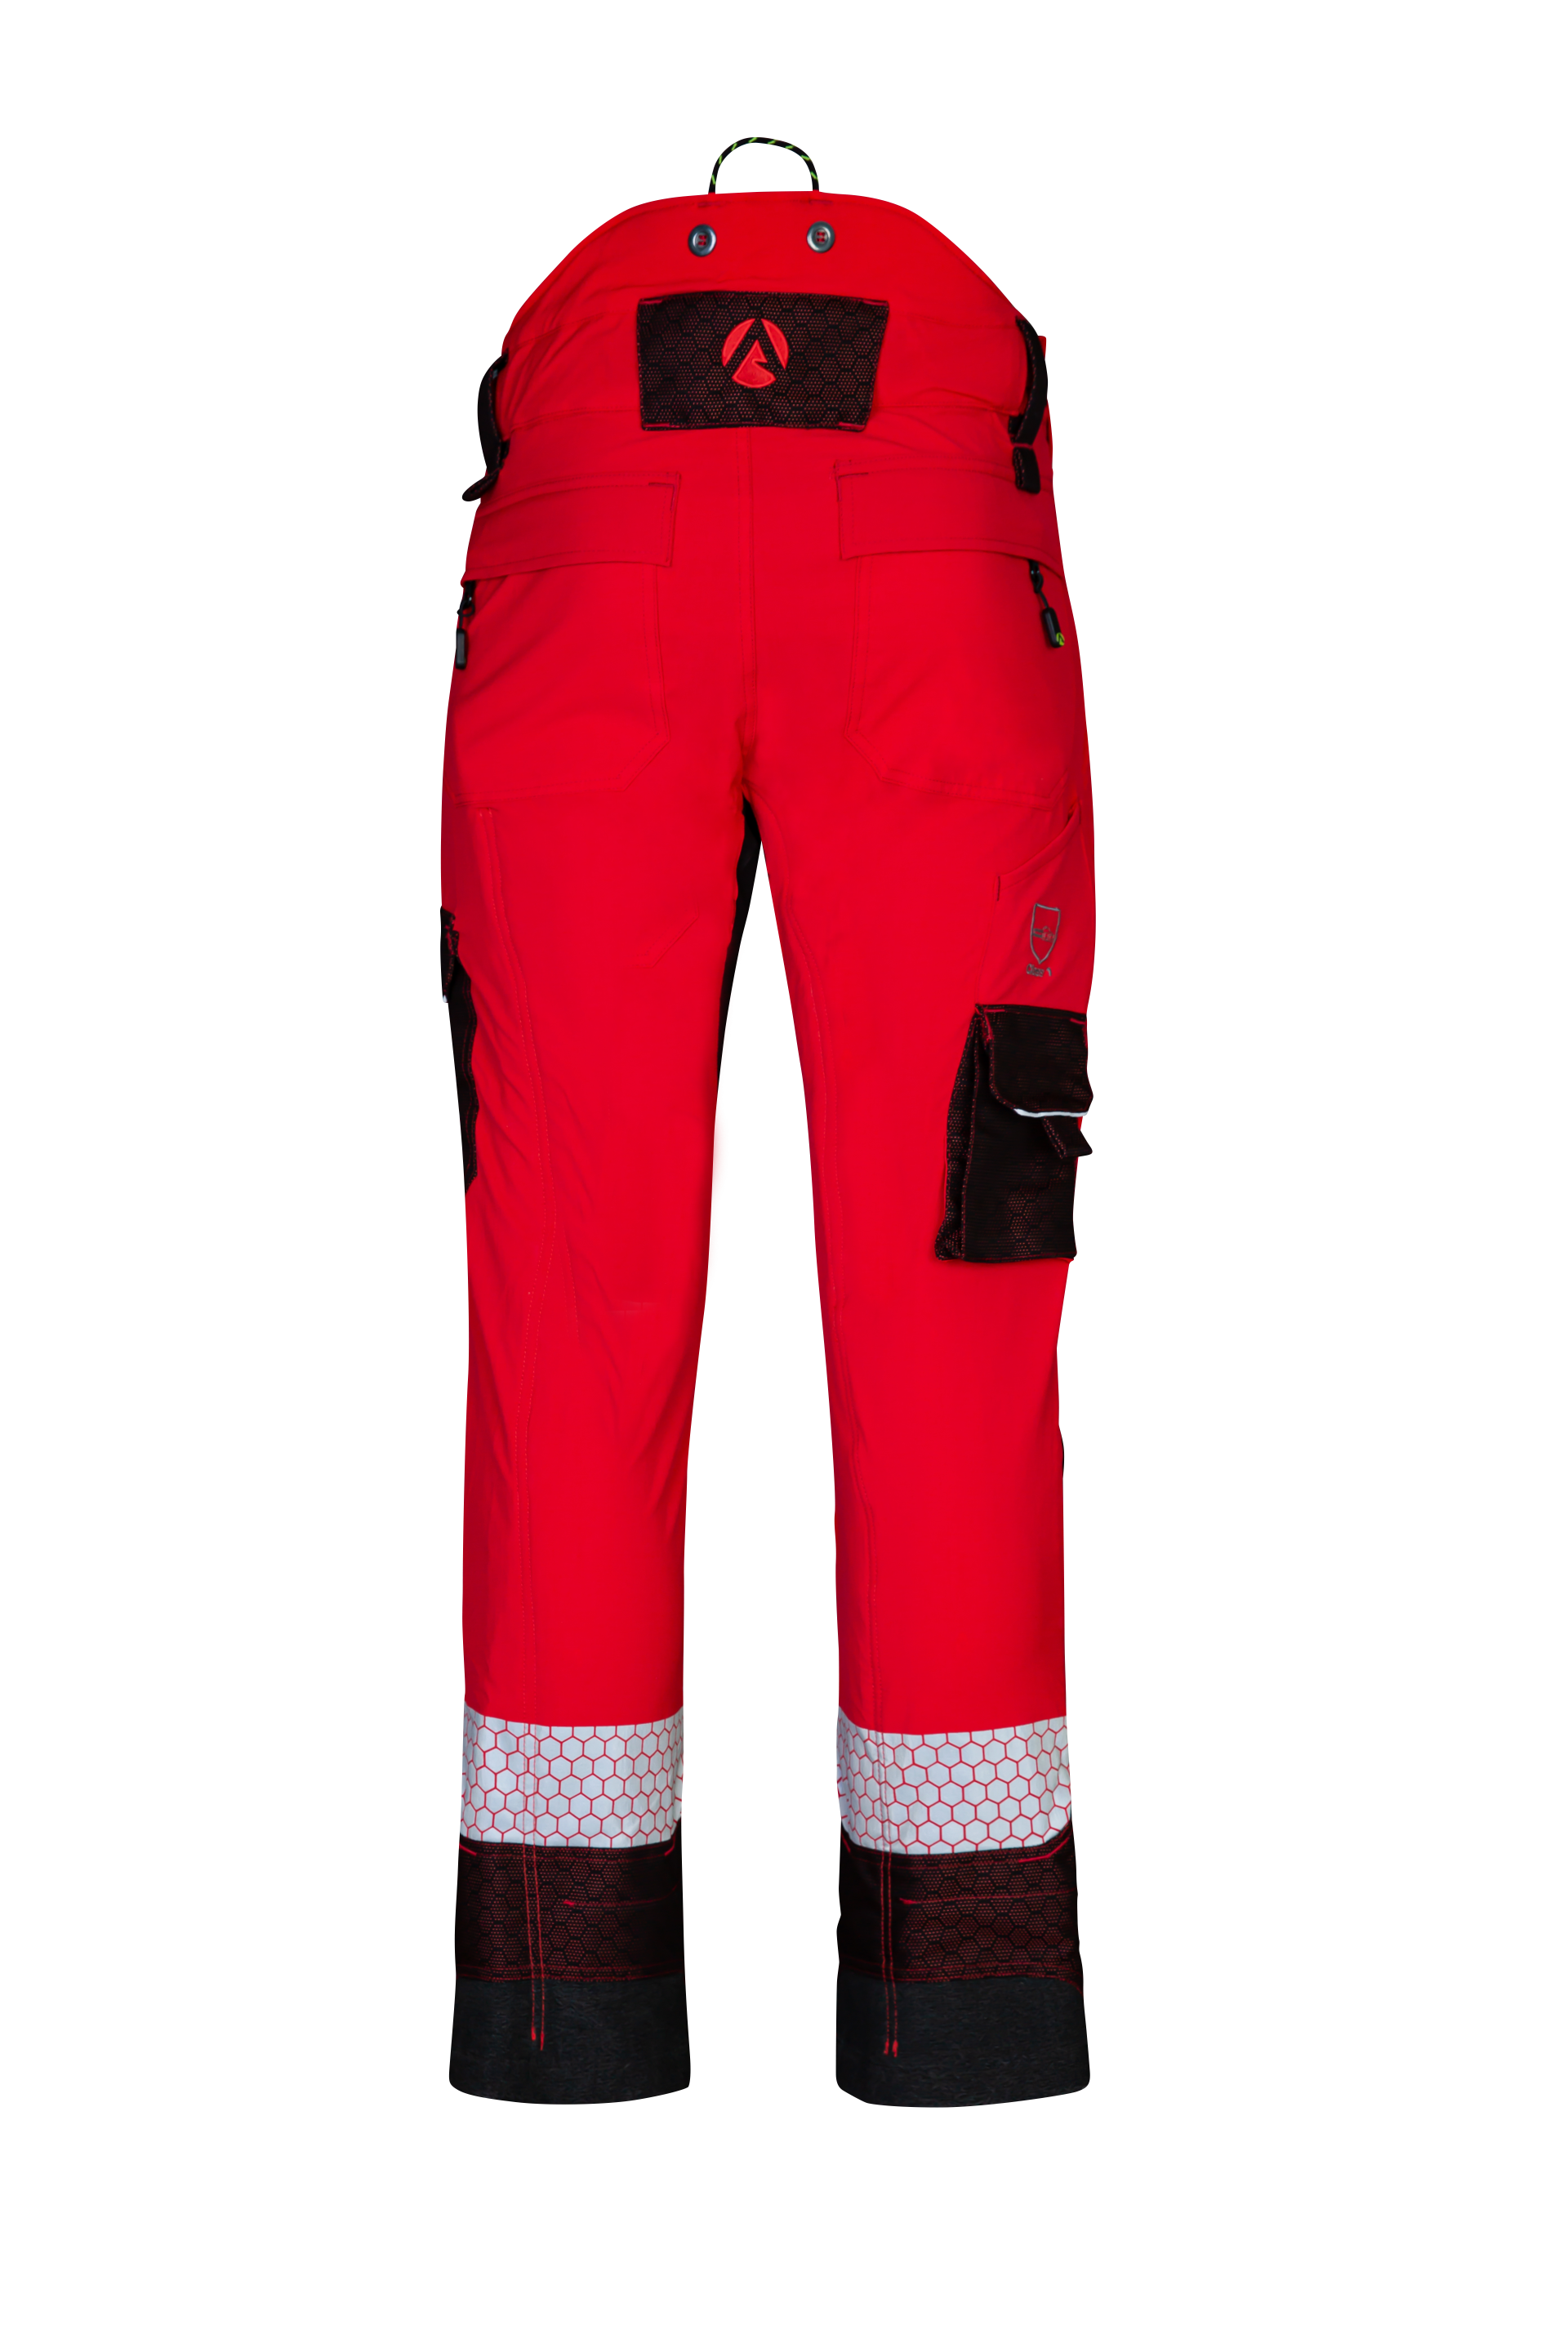 AT4090 - Arbortec Deep Forest Chainsaw Trousers Design C/Class 1 - Red